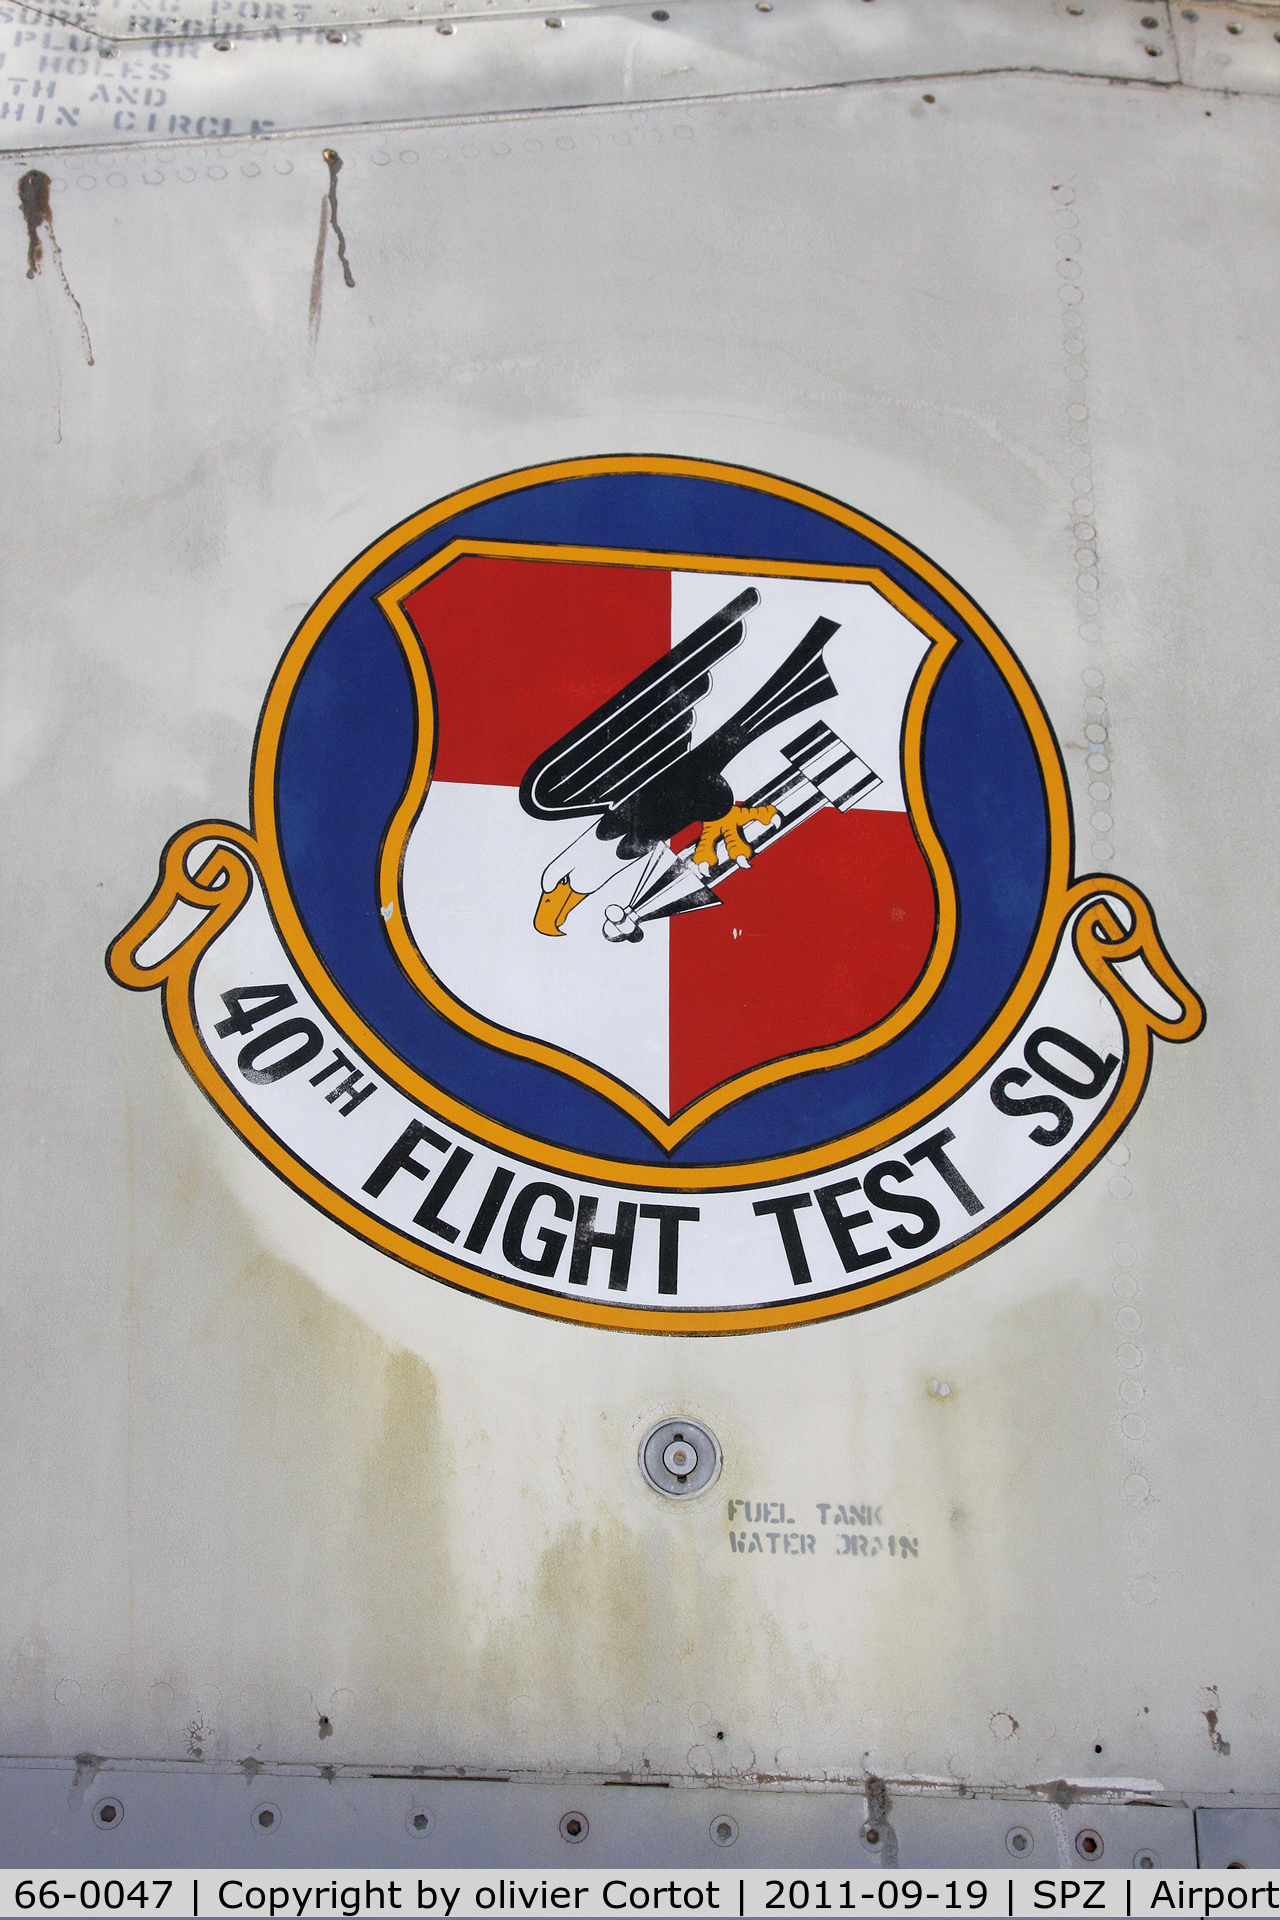 66-0047, 1966 General Dynamics EF-111A Raven C/N EF-08, Test squadron badge on the airframe